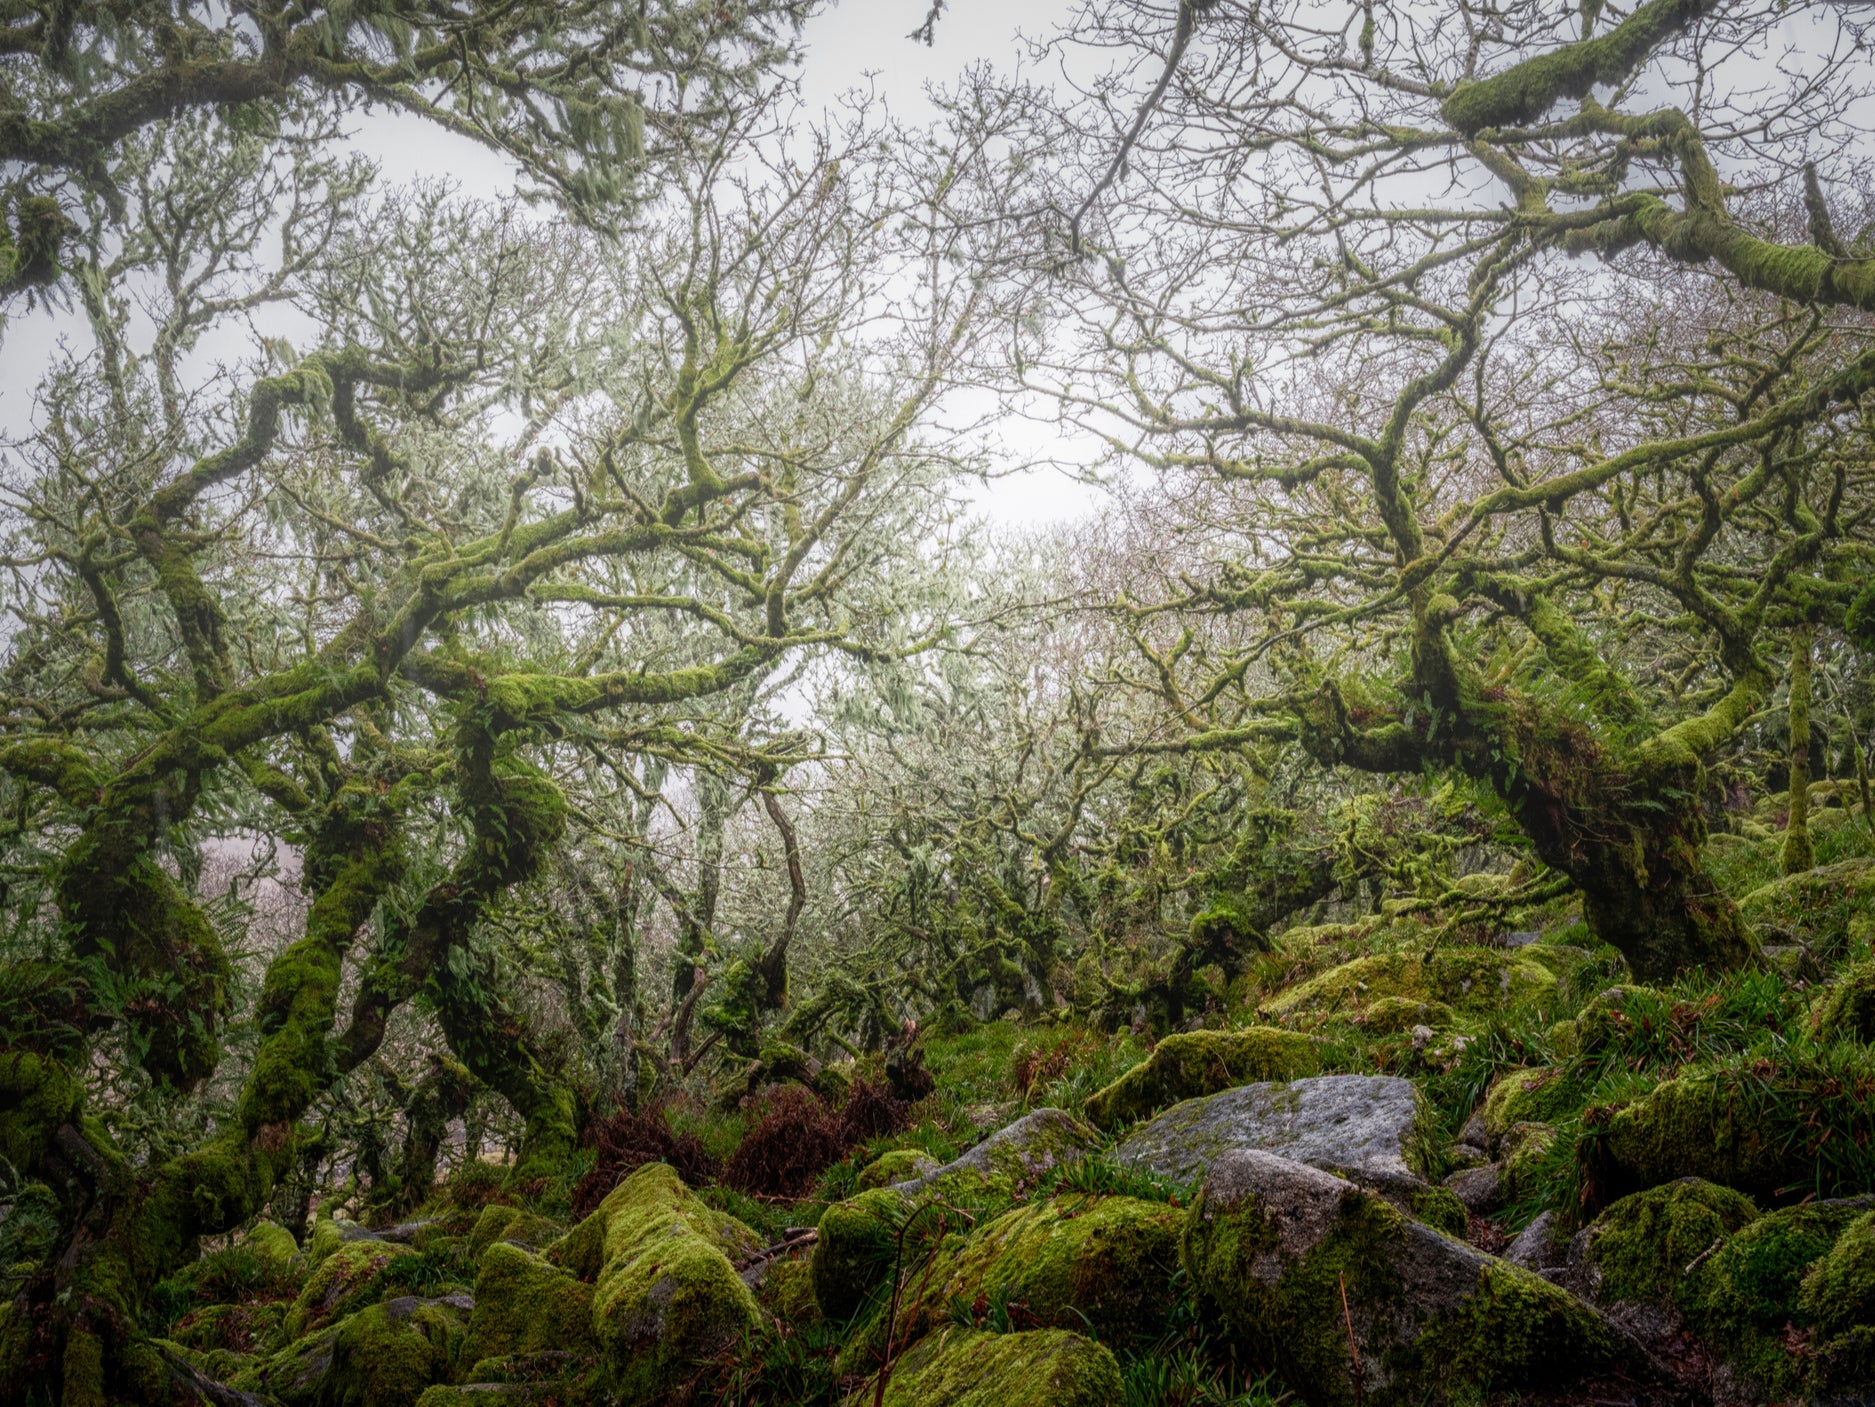 Wistmans Wood, in Dartmoor National Park in Devon, is one of the last fragments of temperate rainforest in Britain